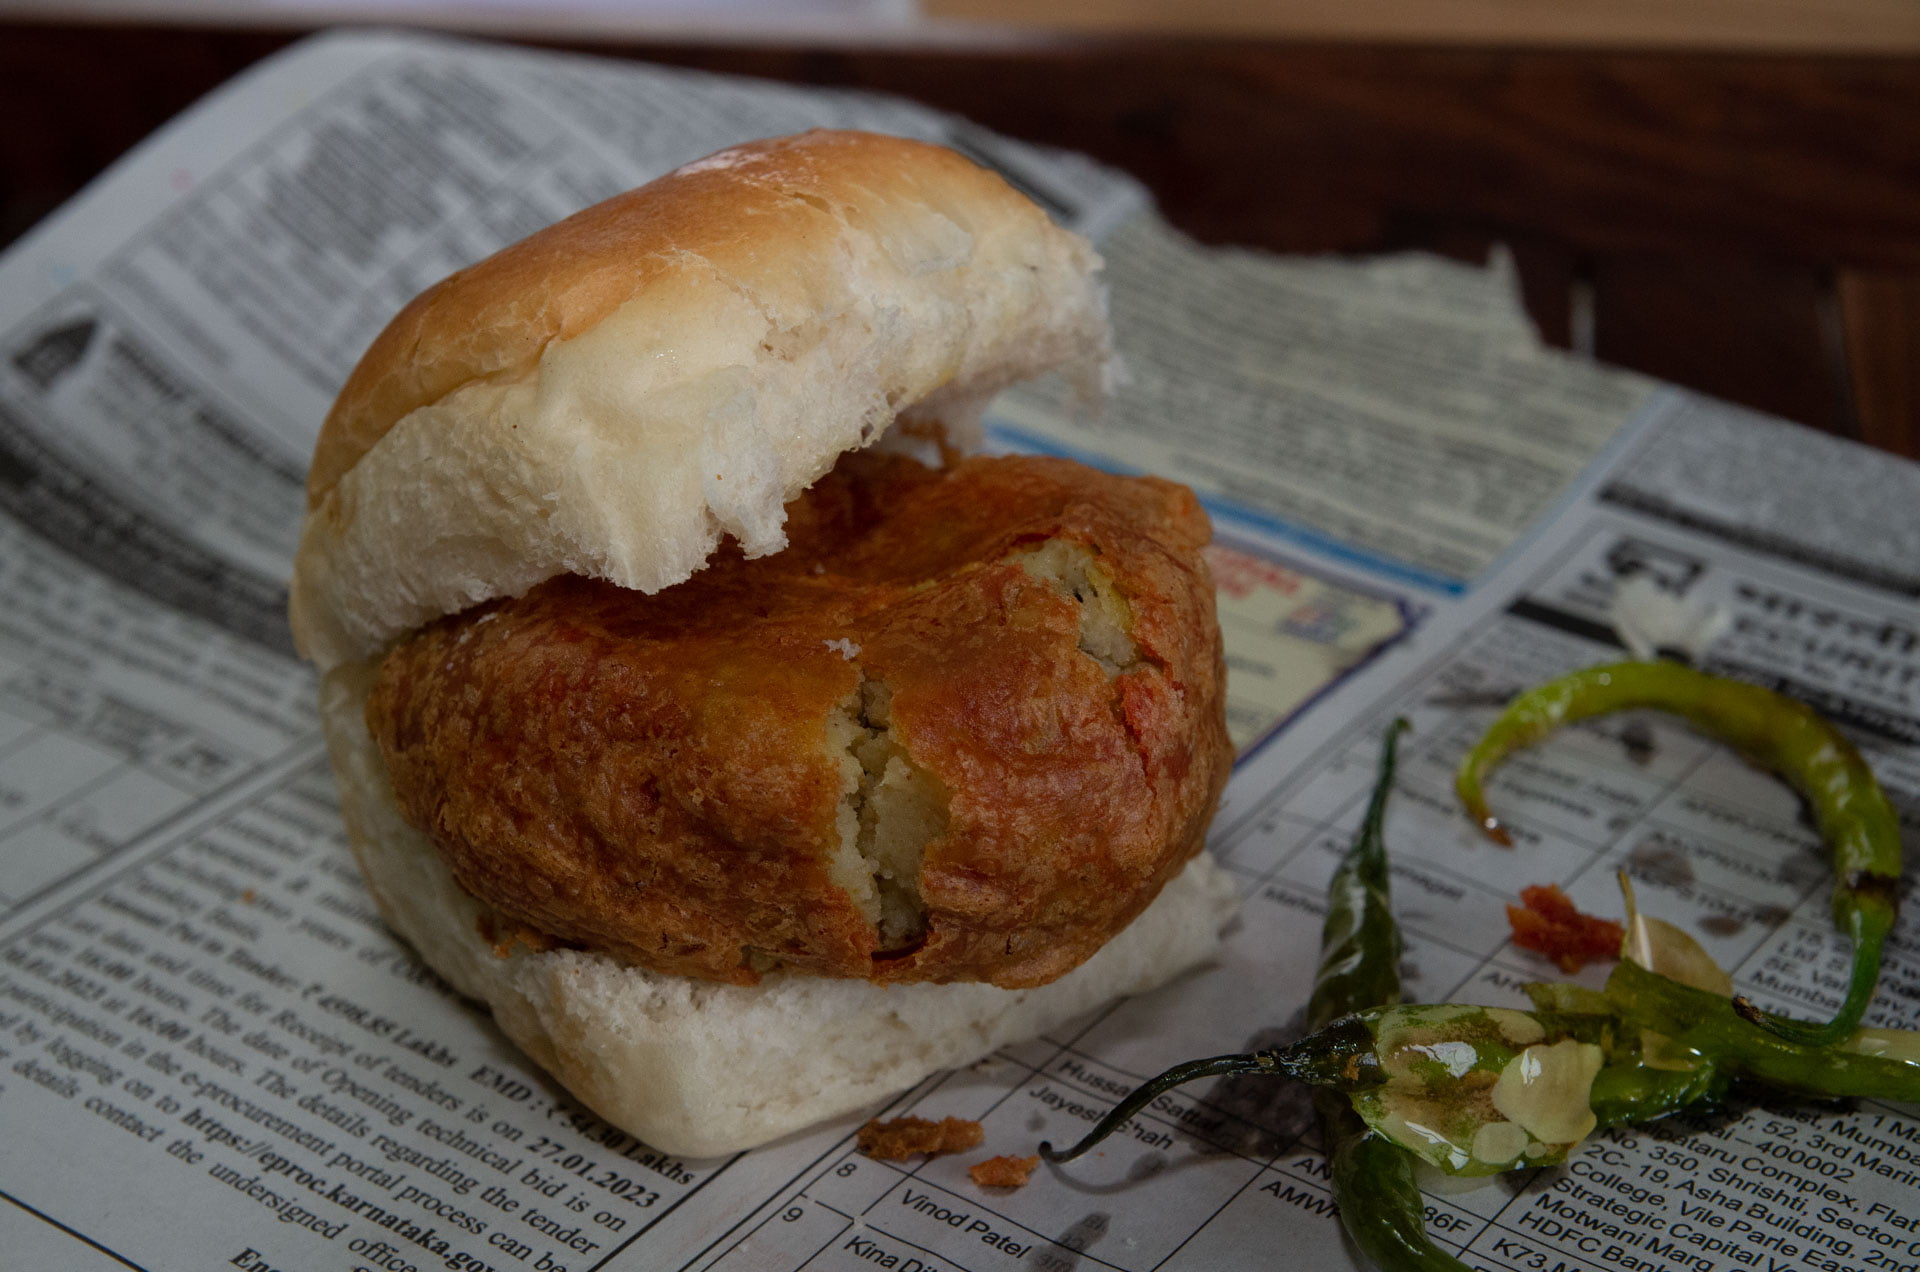 Batata Vada in a Pav with fried green chilies on the side on a newspaper